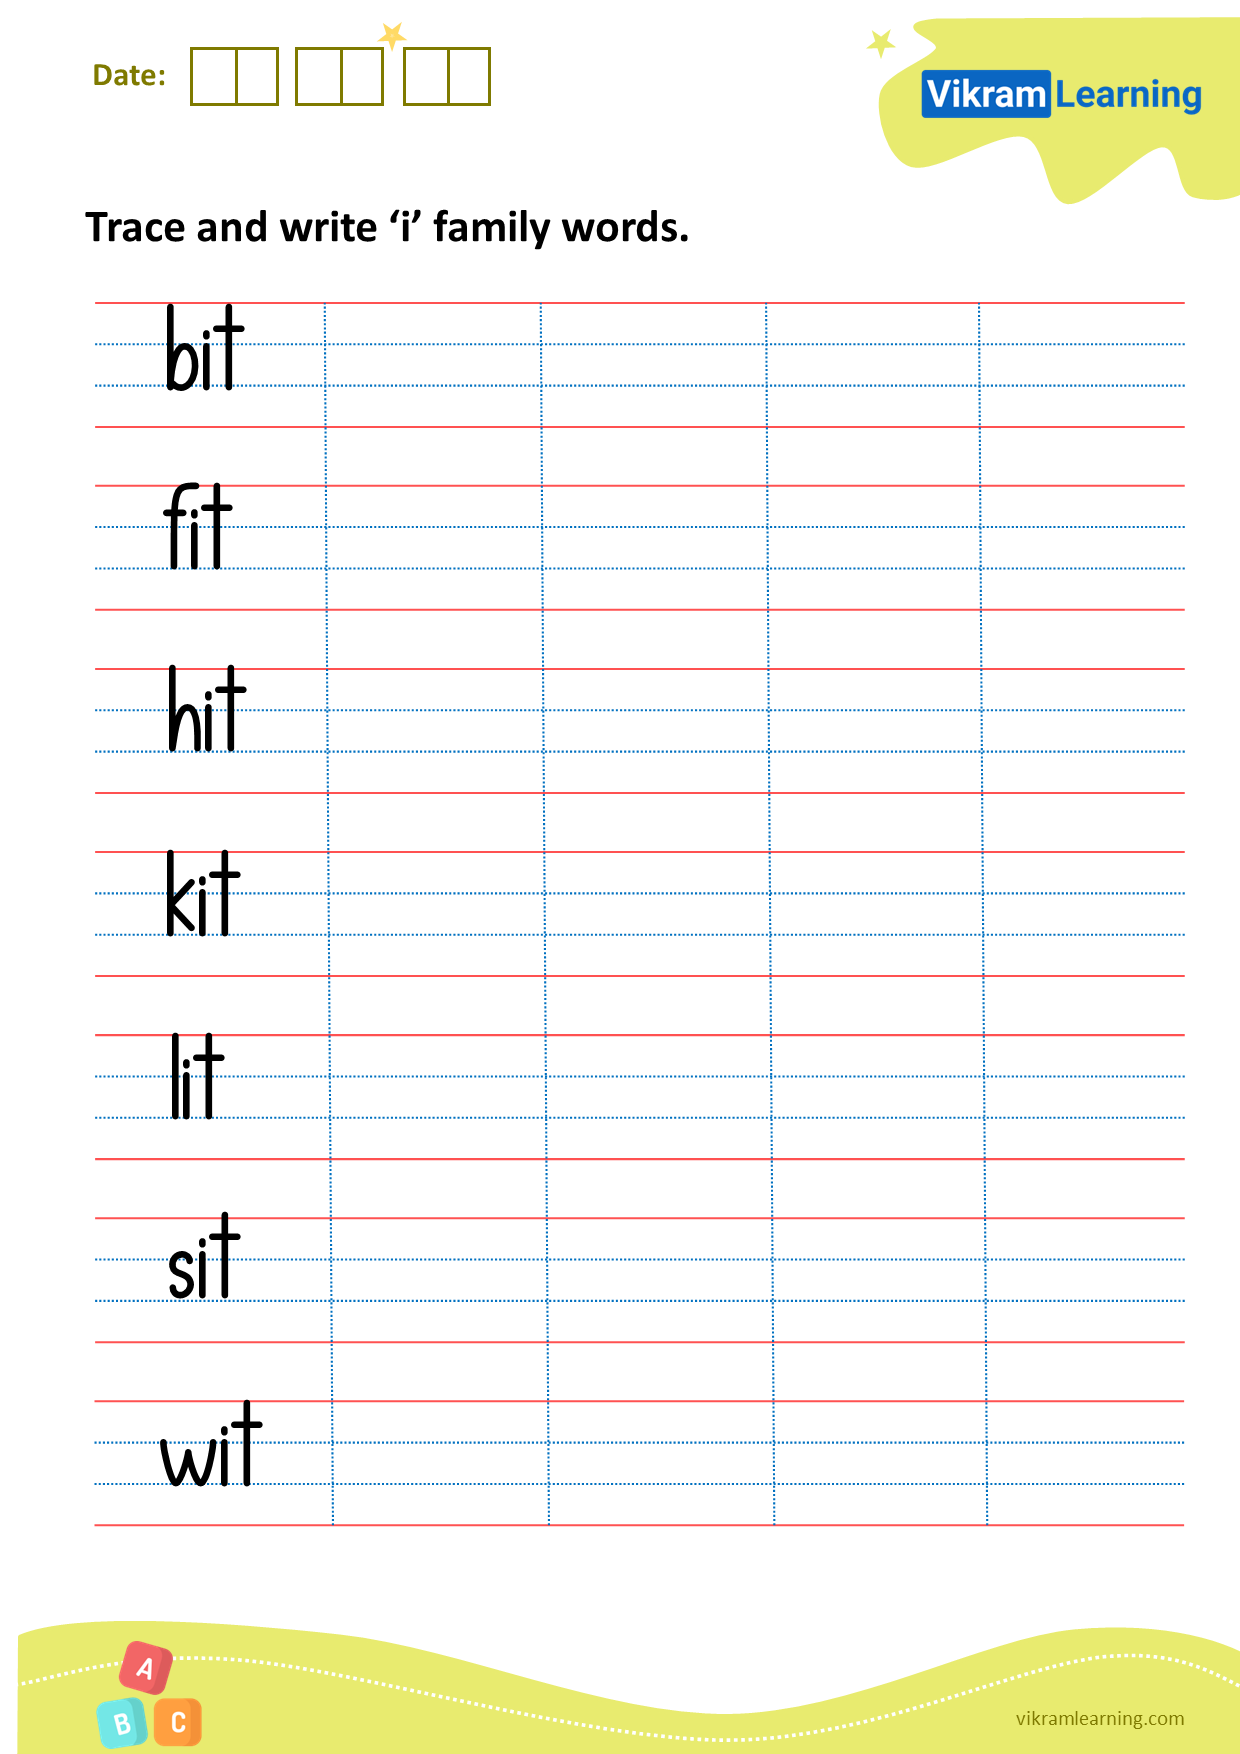 Download trace and write ‘i’ family words worksheets